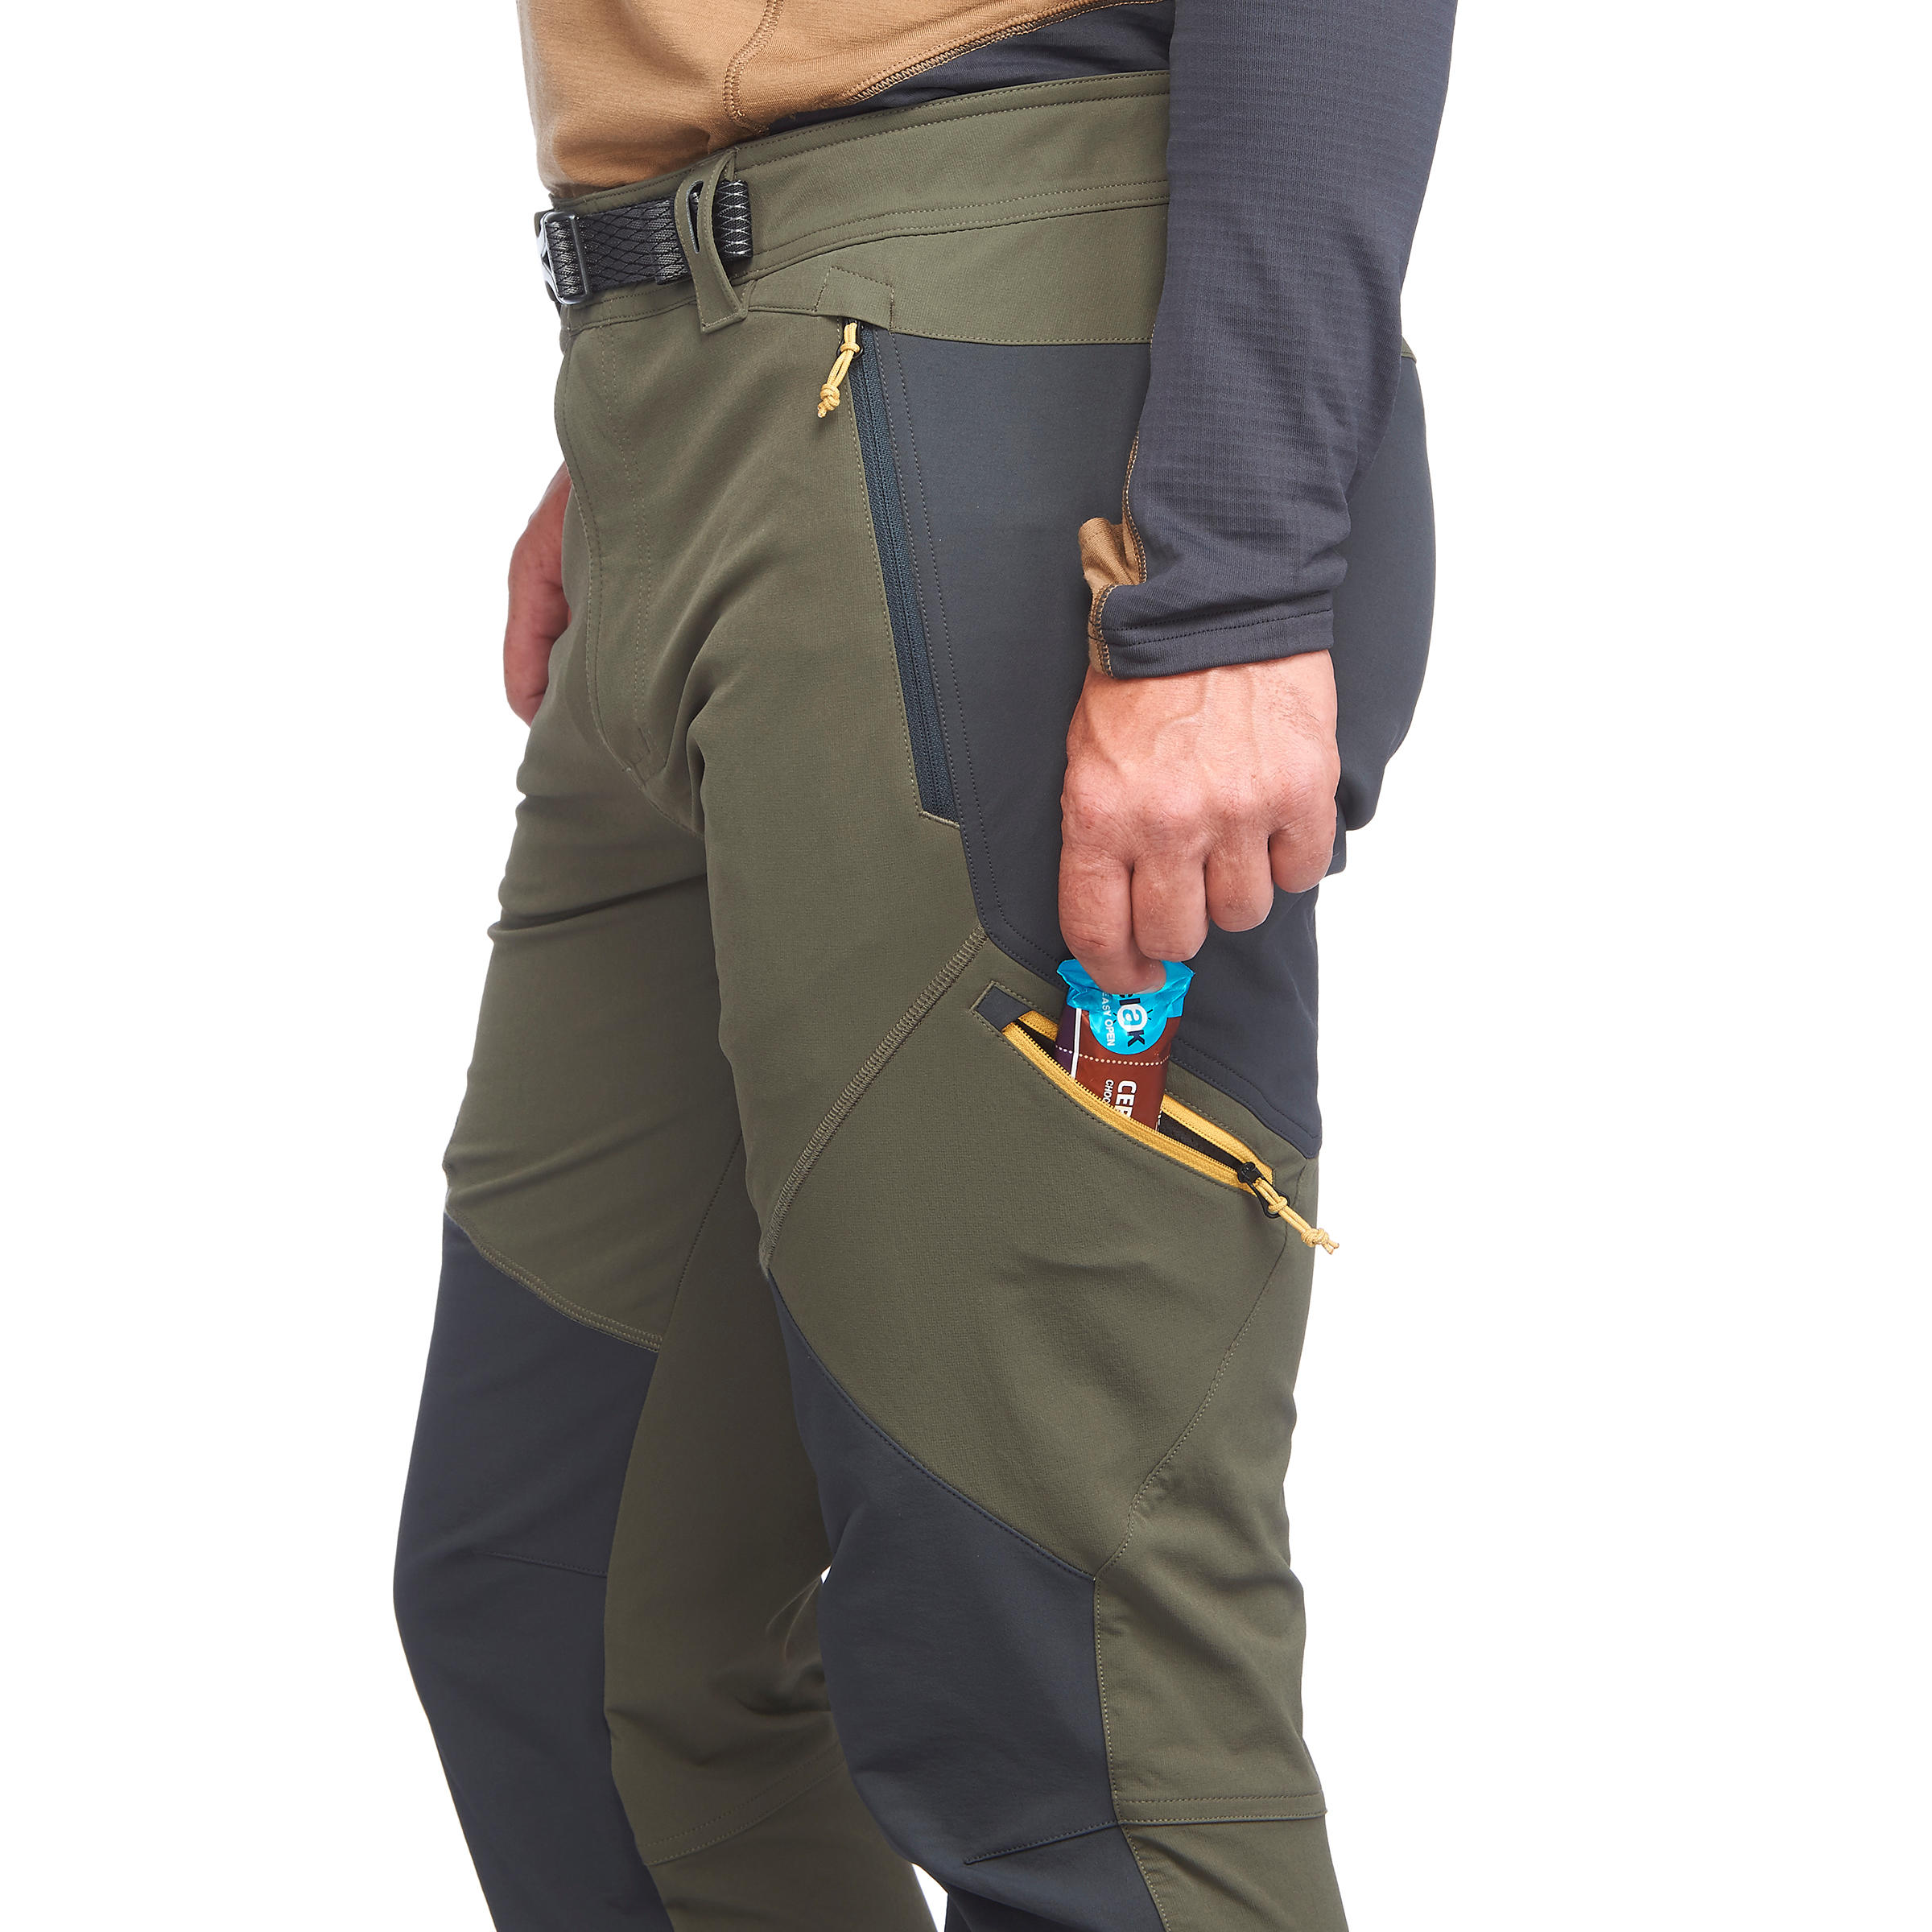 Buy Convertible Trousers Online  Grey Trekking Trousers for Men at Forclaz  by Decathlon